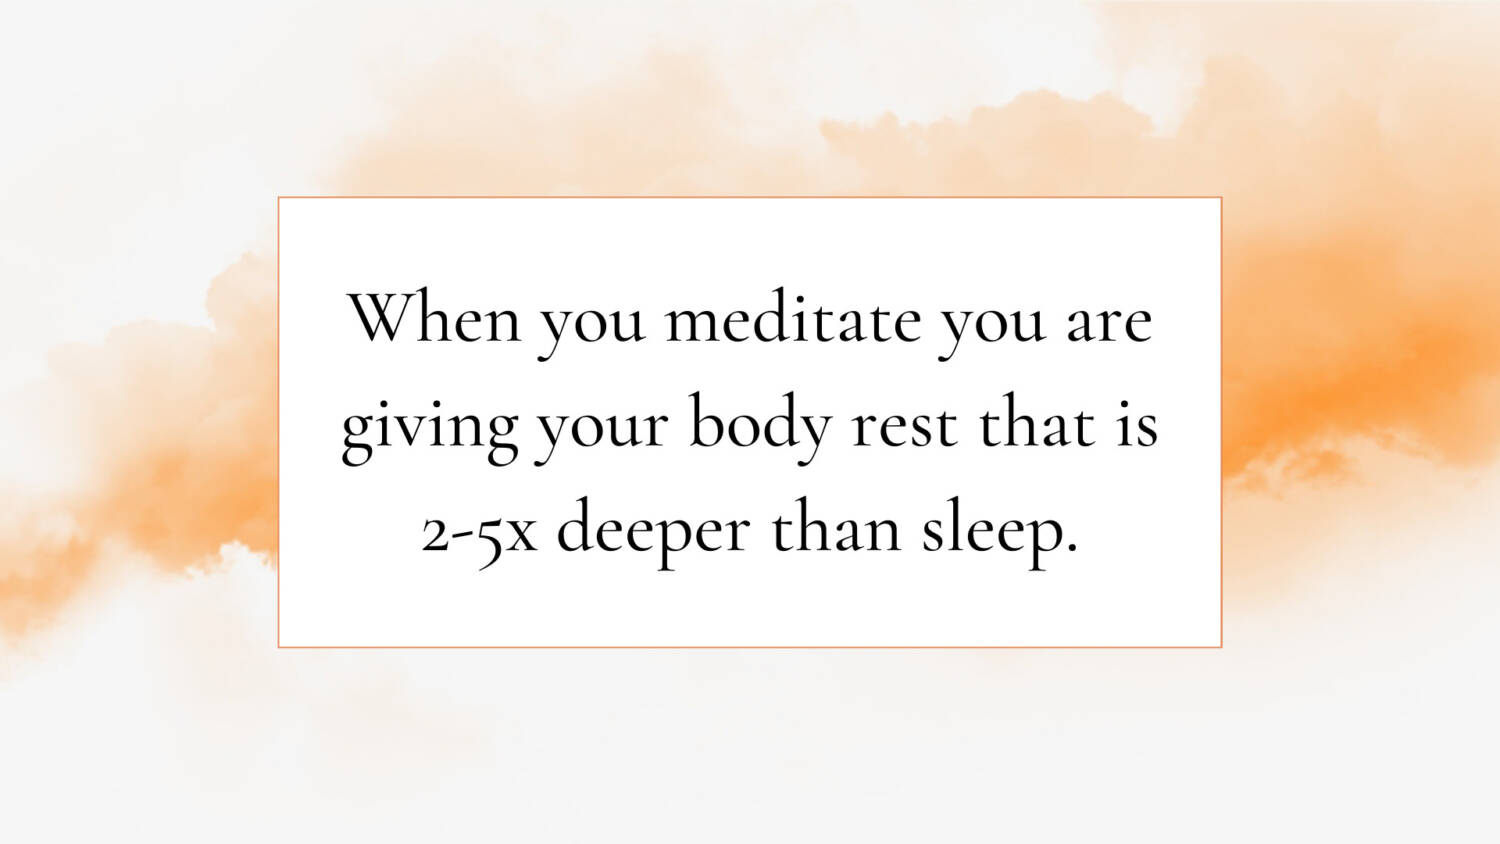 When you meditate you are giving your body rest that is 2-5x deeper than sleep.